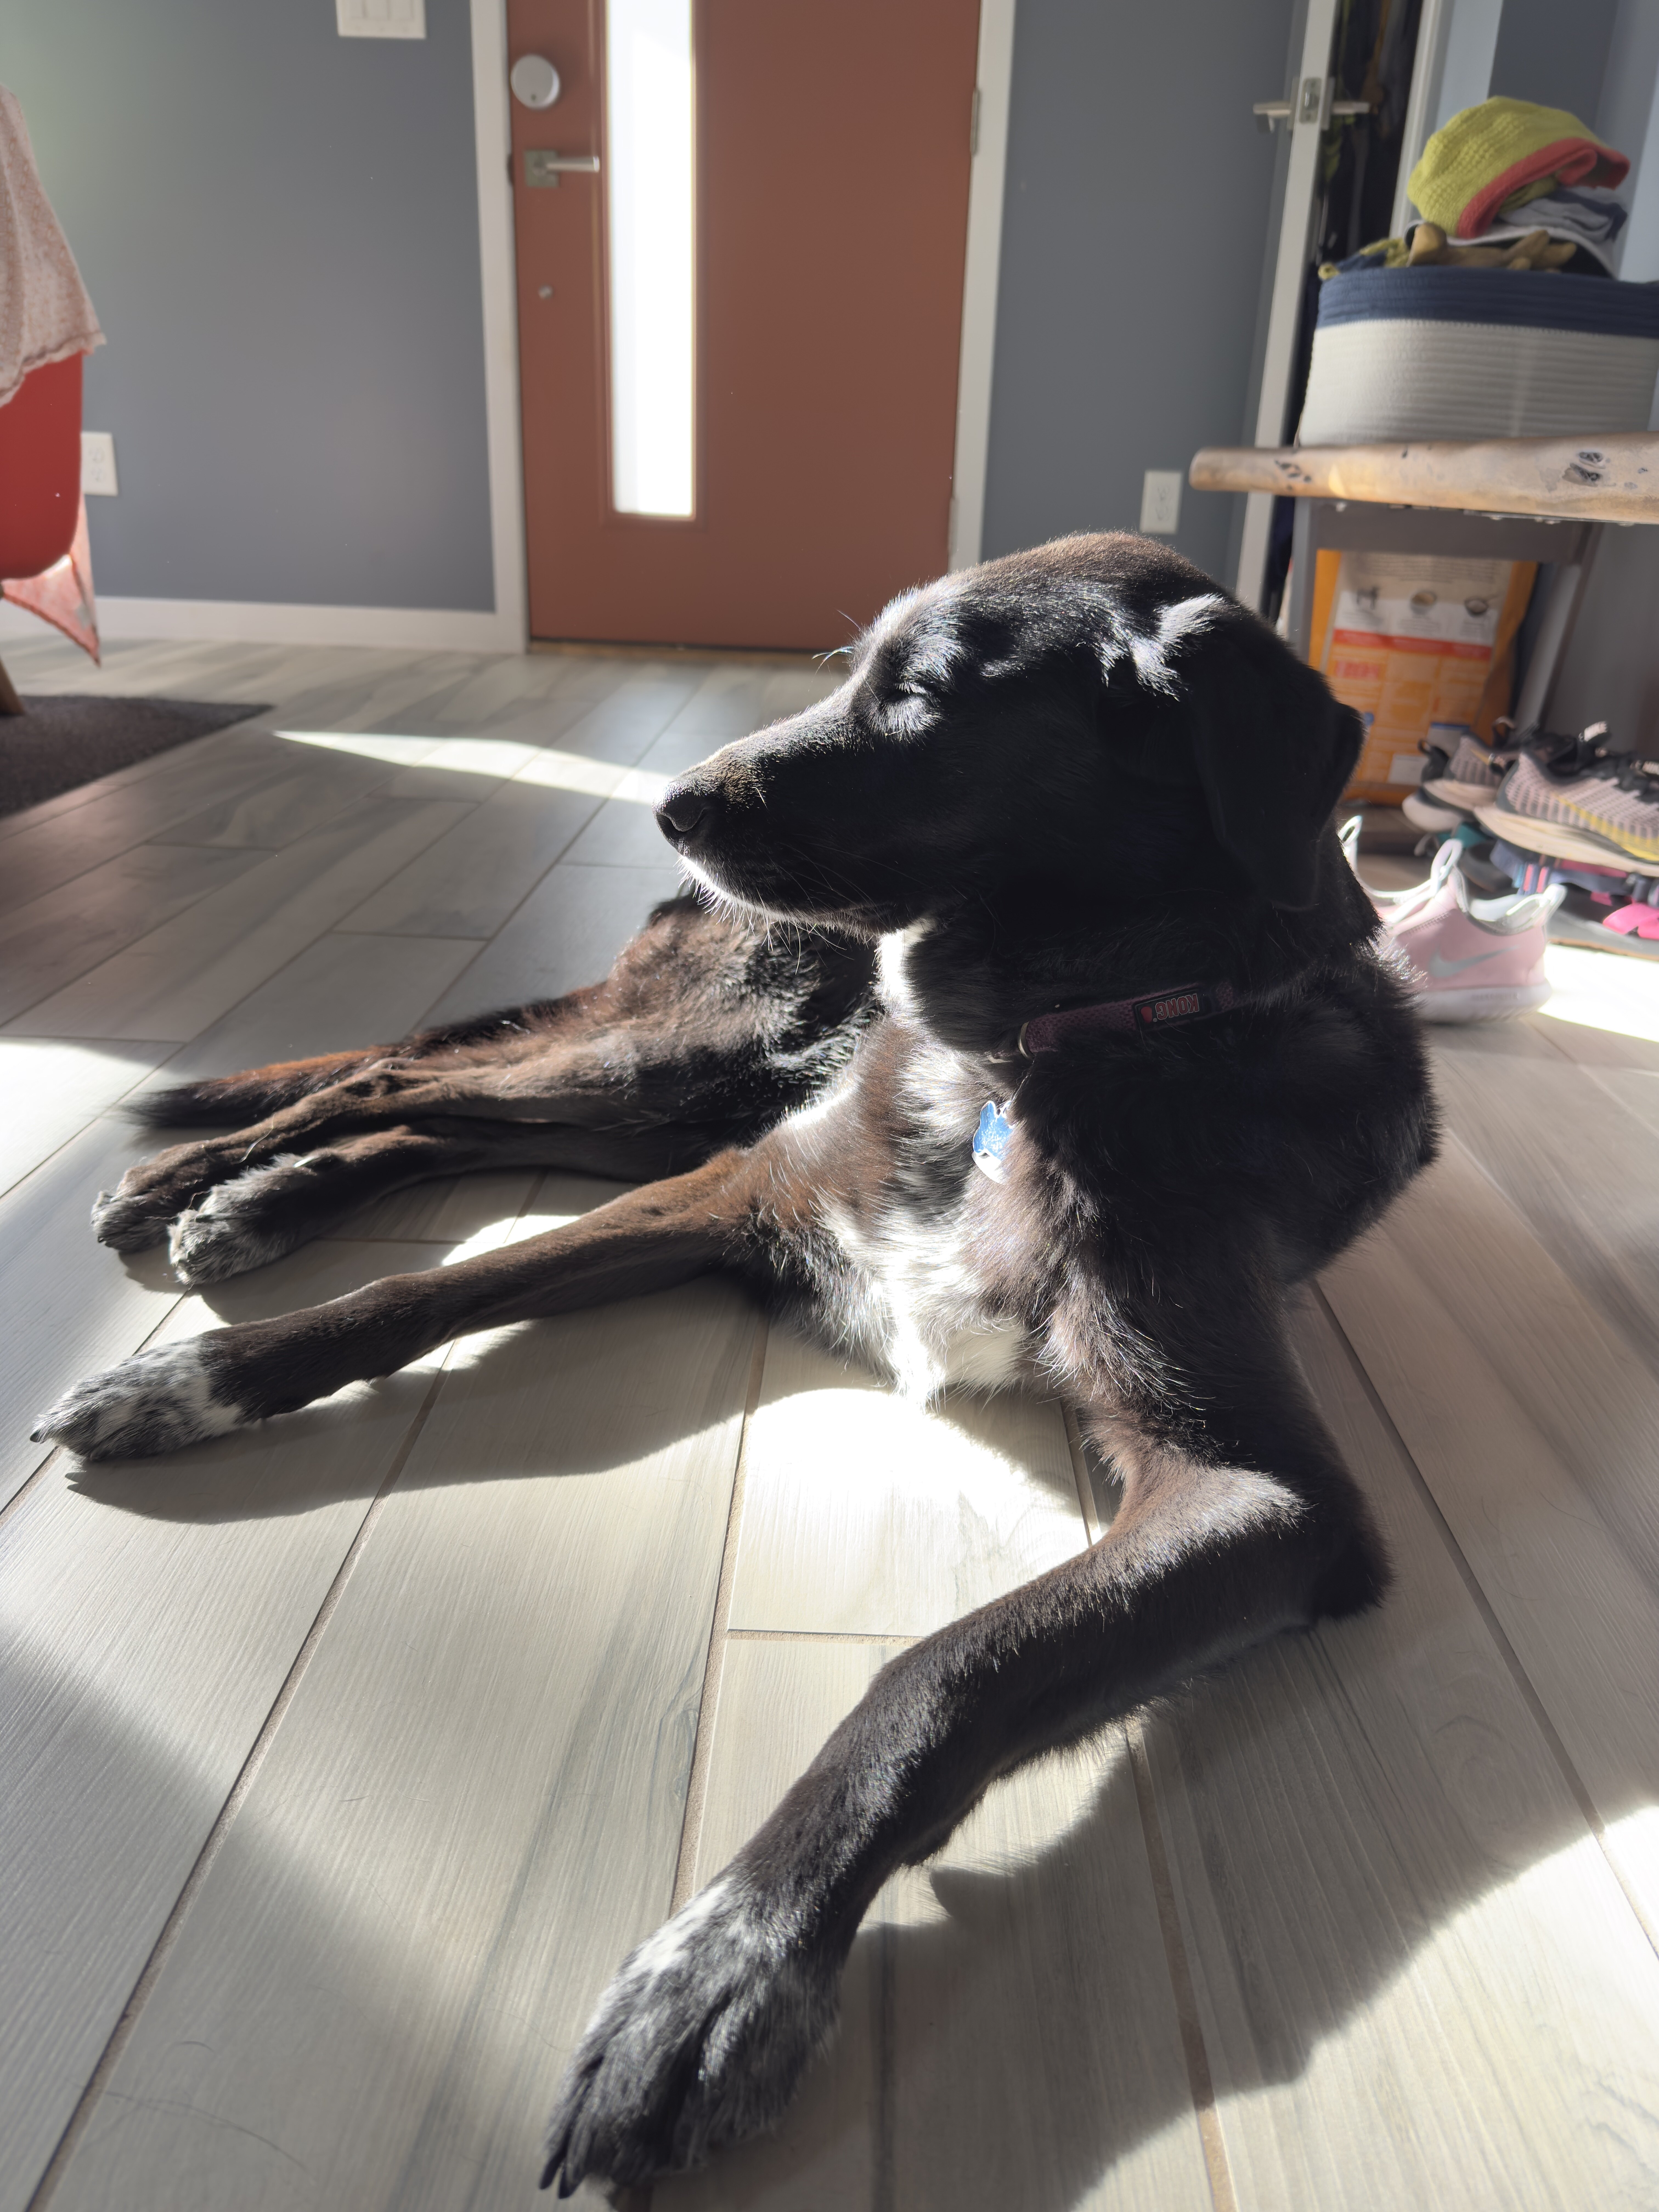 A mostly black dog sits in a bright sunbeam on a tile floor, eyes closed with her face in the sunshine.